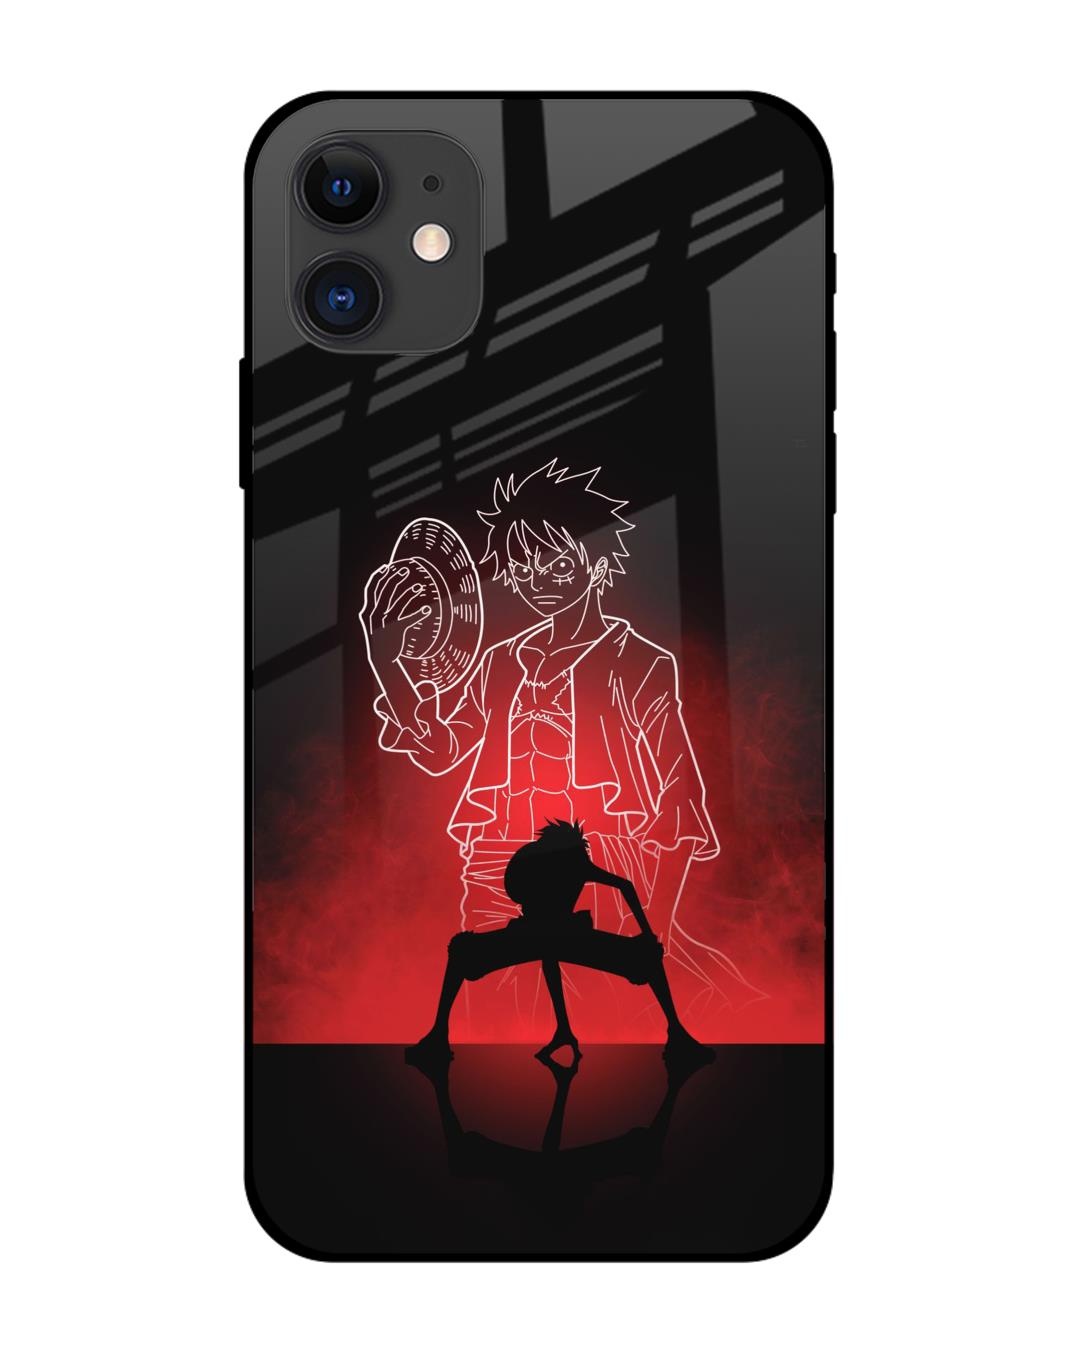 Buy Madara Uchiha Super Stylish Anime Art Design Printed Blue Mobile Case  Cover For Iphone 6 6s 7 8 Plus 11 12 13 Pro Max Mini X Xr Xs Se (iphone 6)  Online In India At Discounted Prices